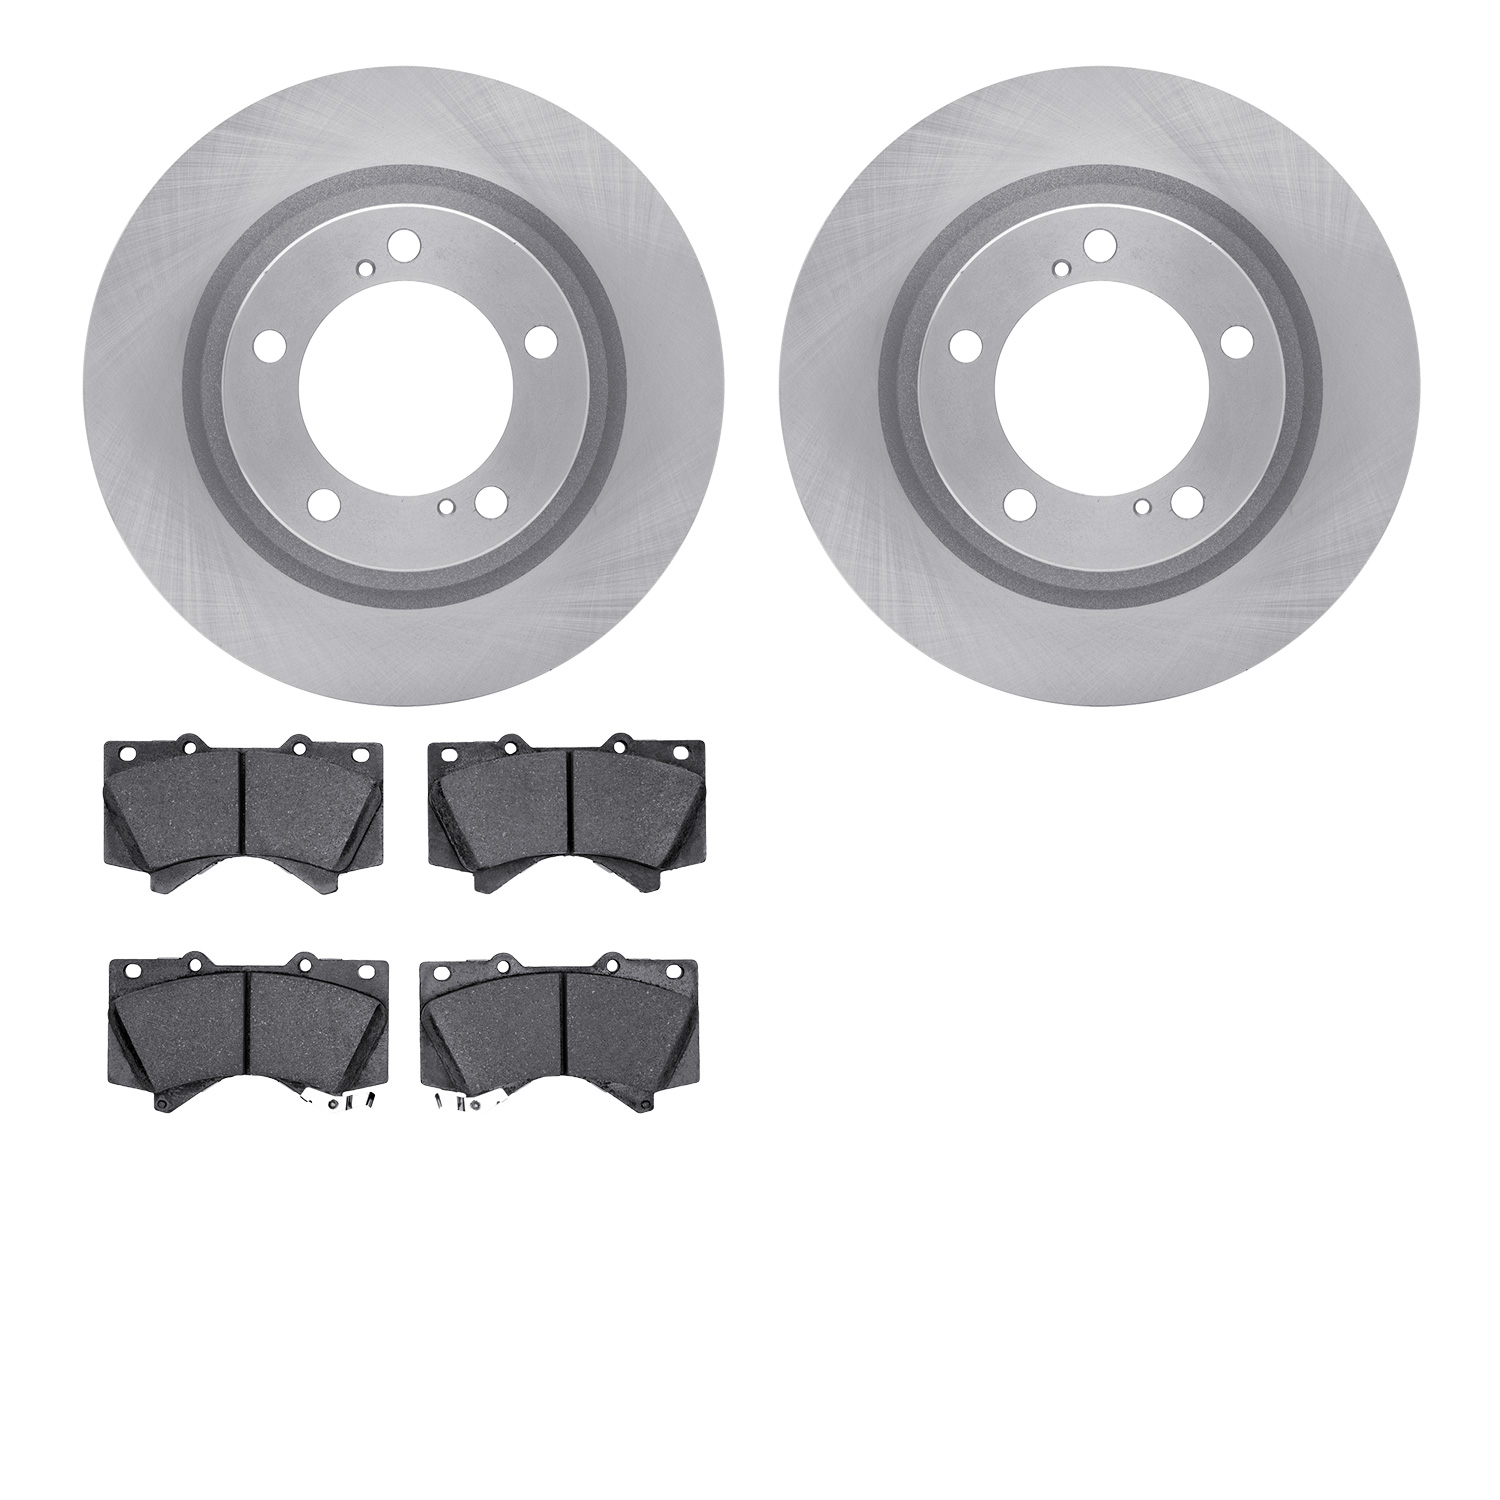 6402-76058 Brake Rotors with Ultimate-Duty Brake Pads, Fits Select Lexus/Toyota/Scion, Position: Front